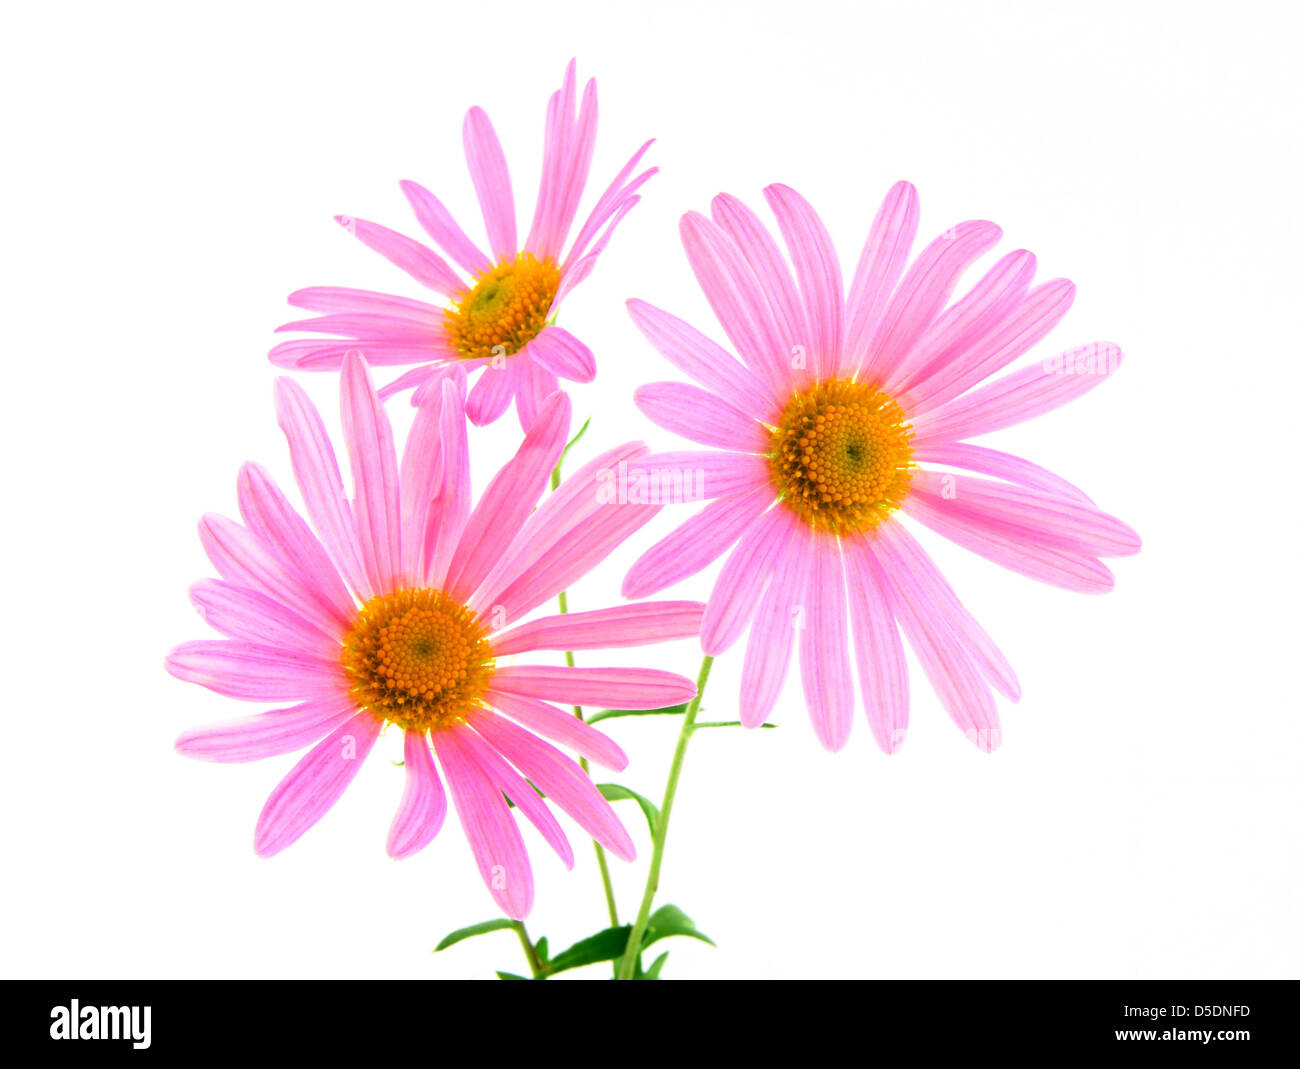 Three delicate pink gerbera daisies on white background. Stock Photo